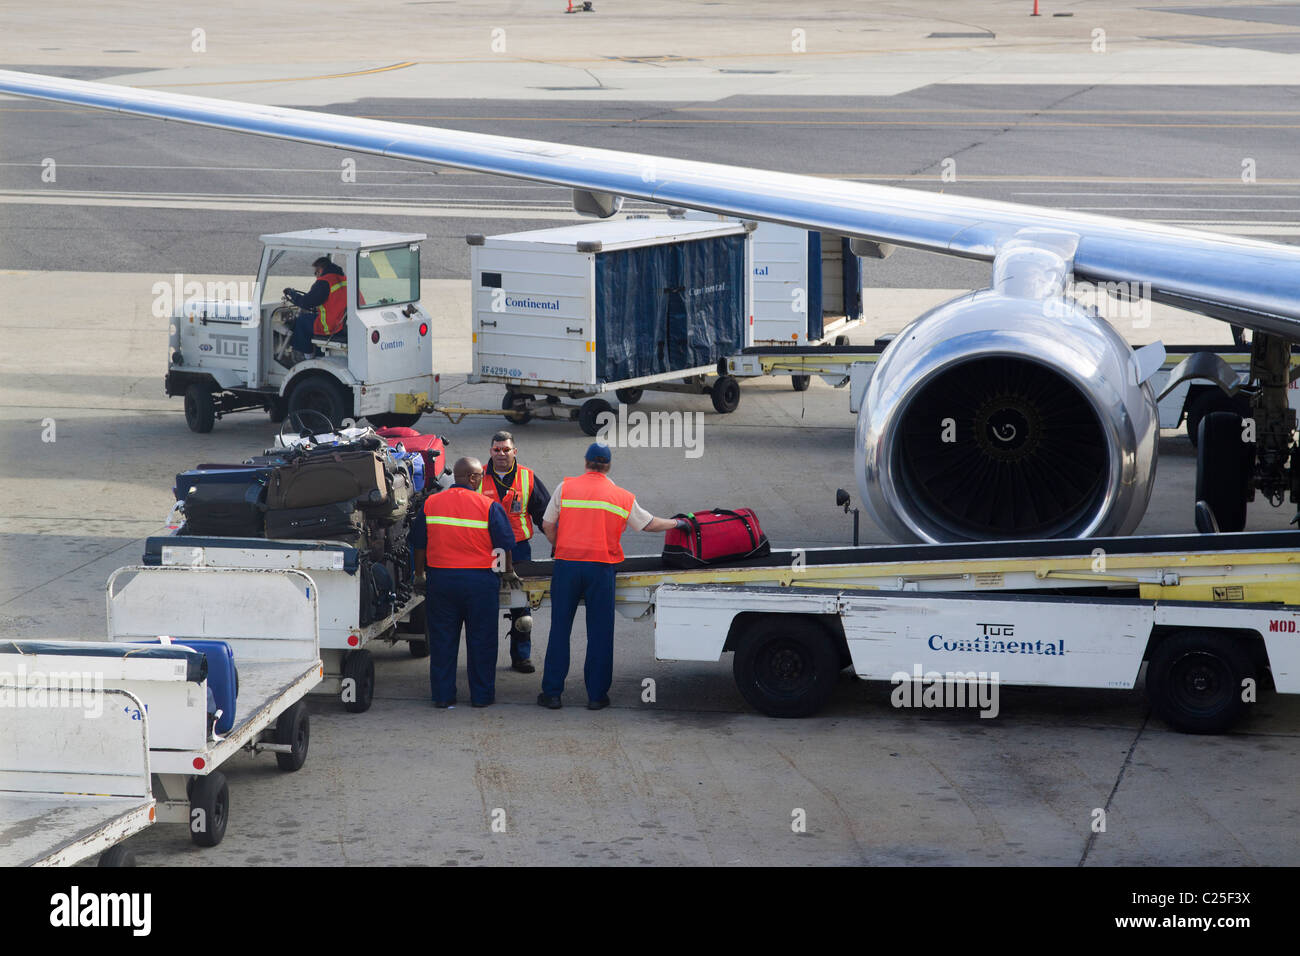 Baggage handlers loading luggage onto a convey into an airplane on the tarmac of New Orleans Airport Stock Photo